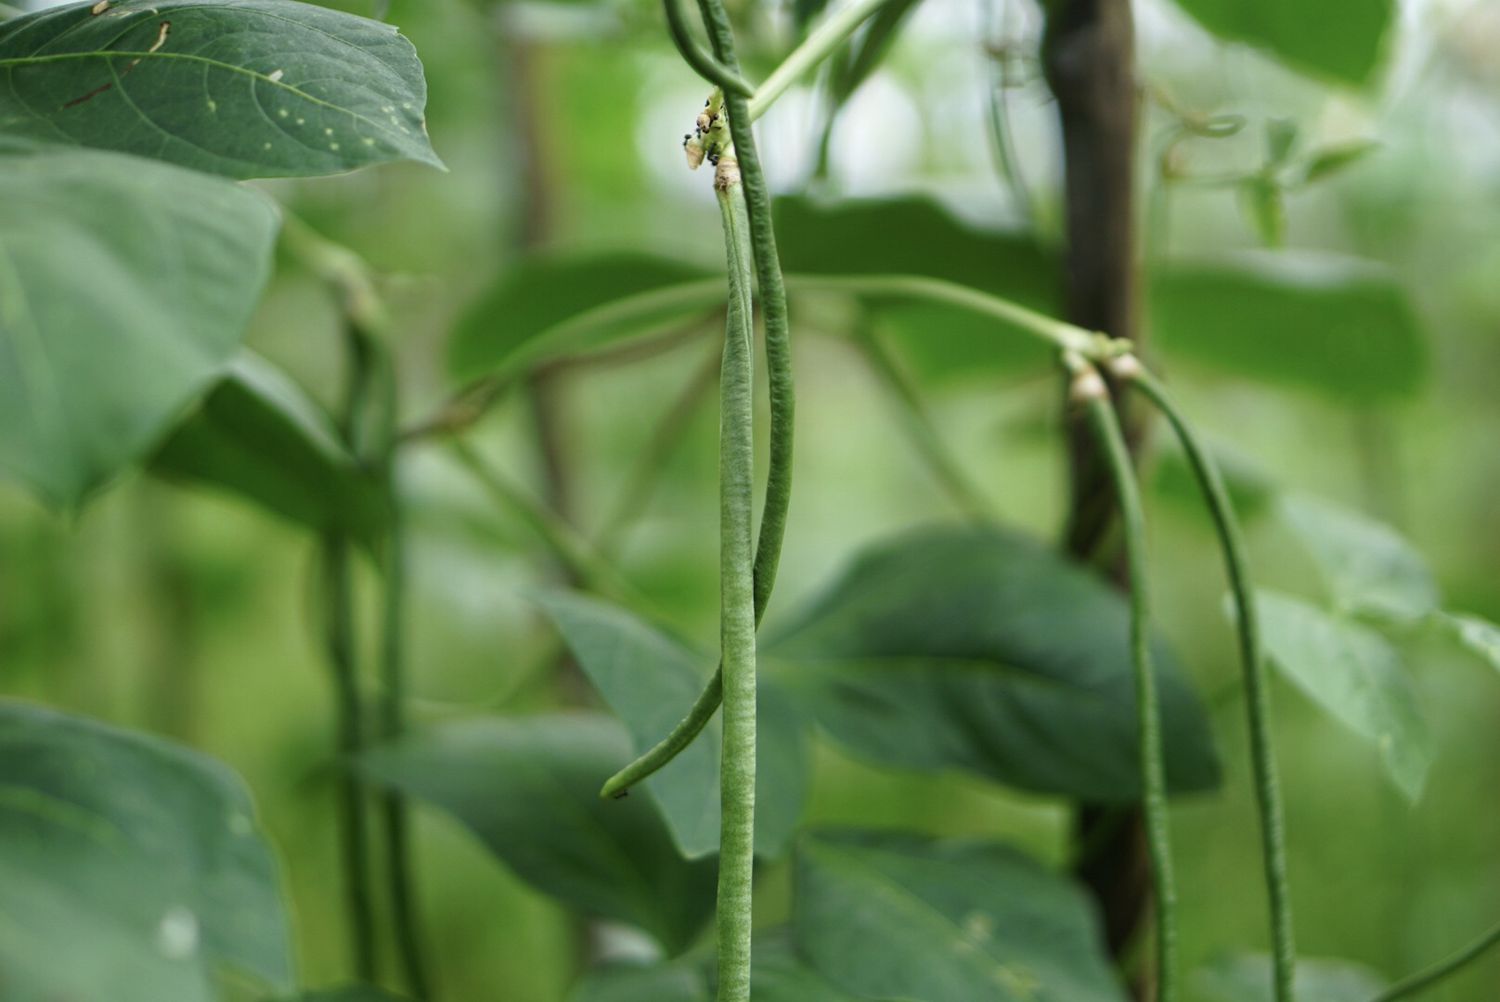 Yardlong bean pods hanging from end stems closeup